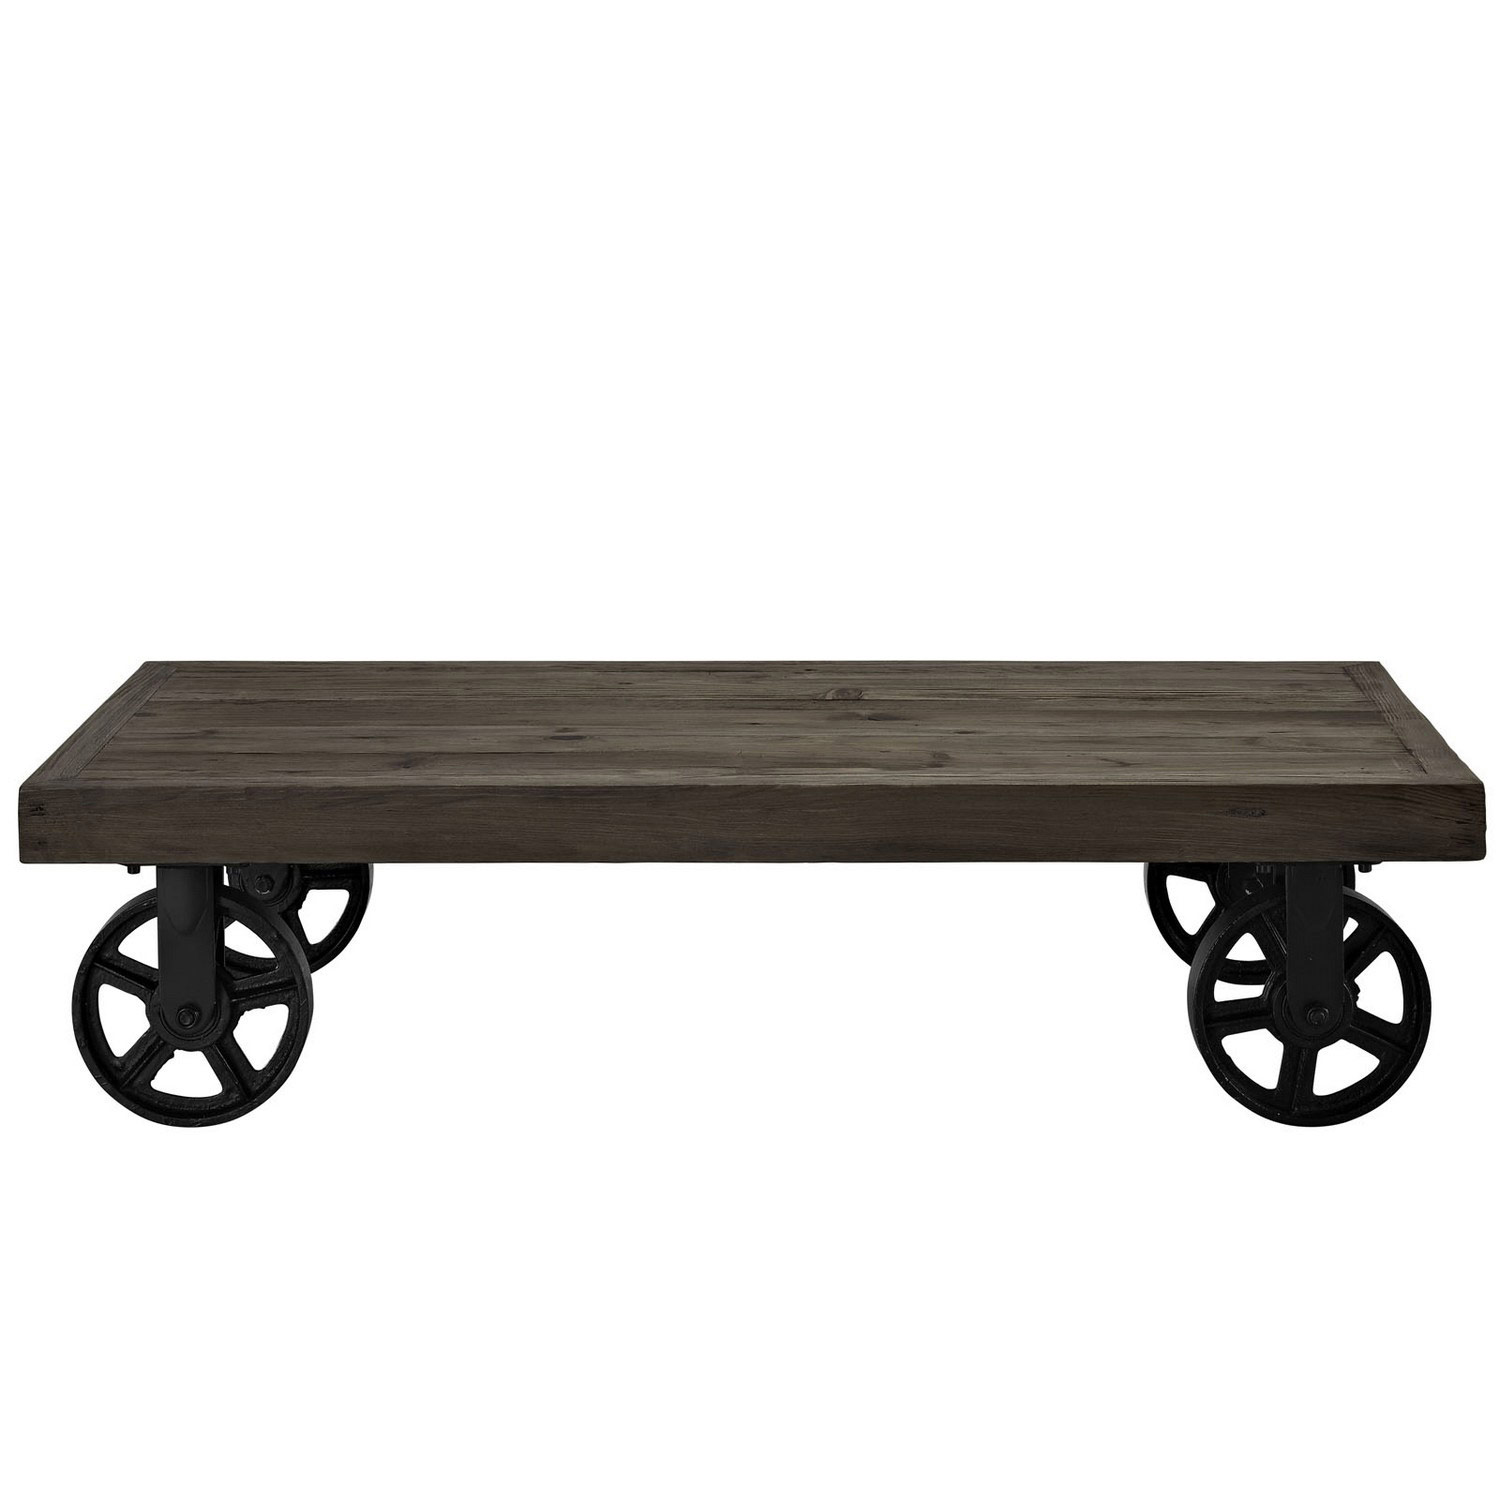 Modway Garrison Wood Top Coffee Table - Brown